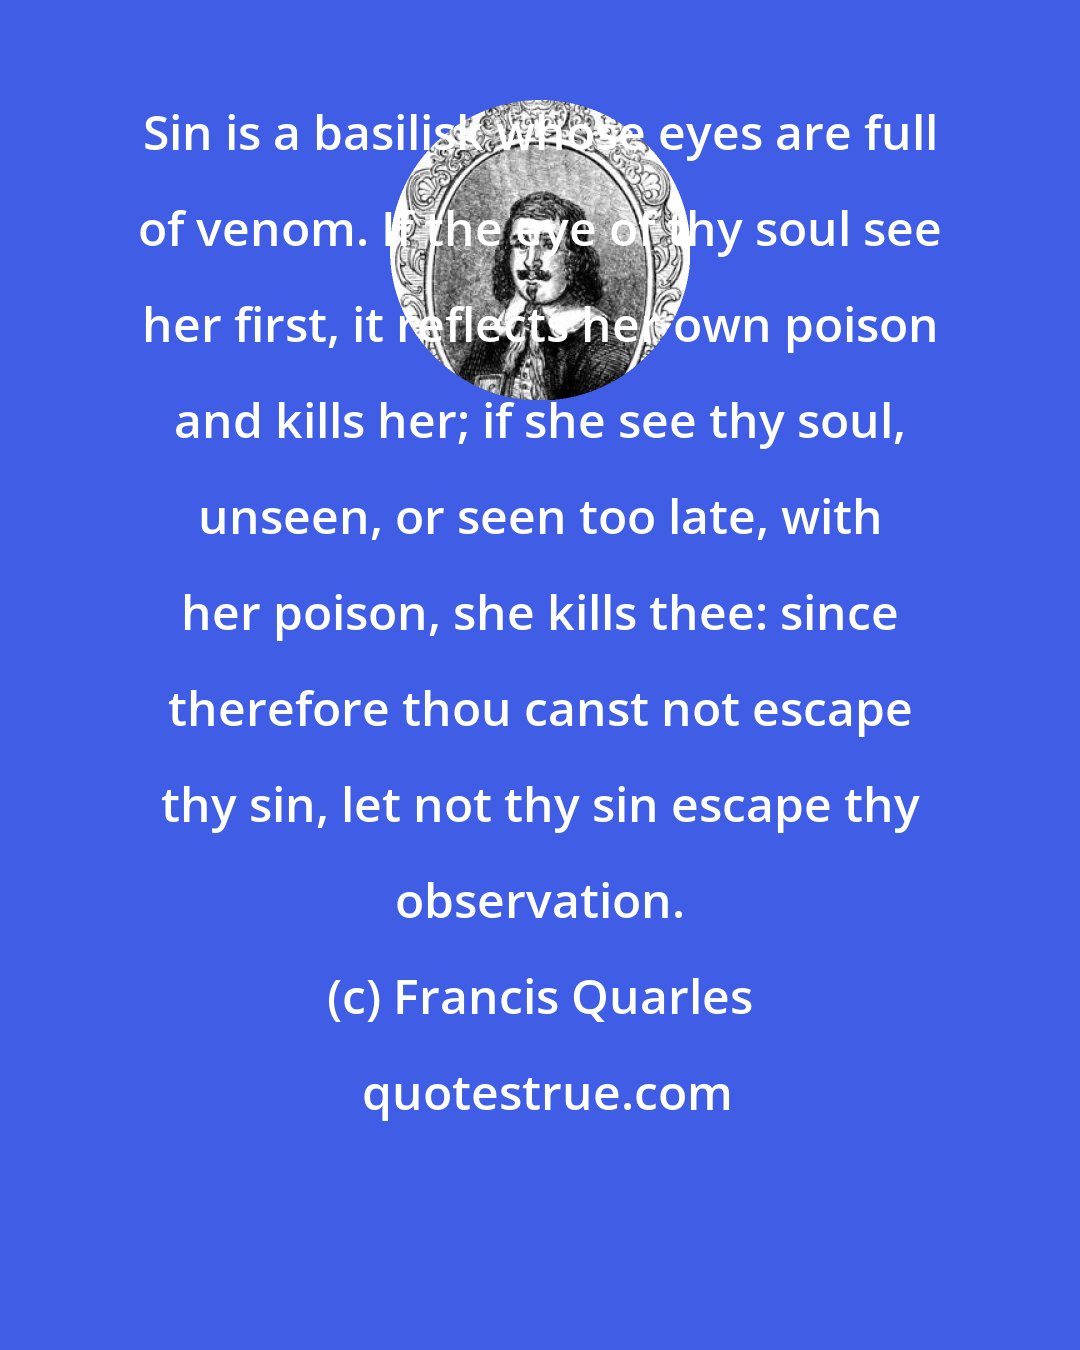 Francis Quarles: Sin is a basilisk whose eyes are full of venom. If the eye of thy soul see her first, it reflects her own poison and kills her; if she see thy soul, unseen, or seen too late, with her poison, she kills thee: since therefore thou canst not escape thy sin, let not thy sin escape thy observation.